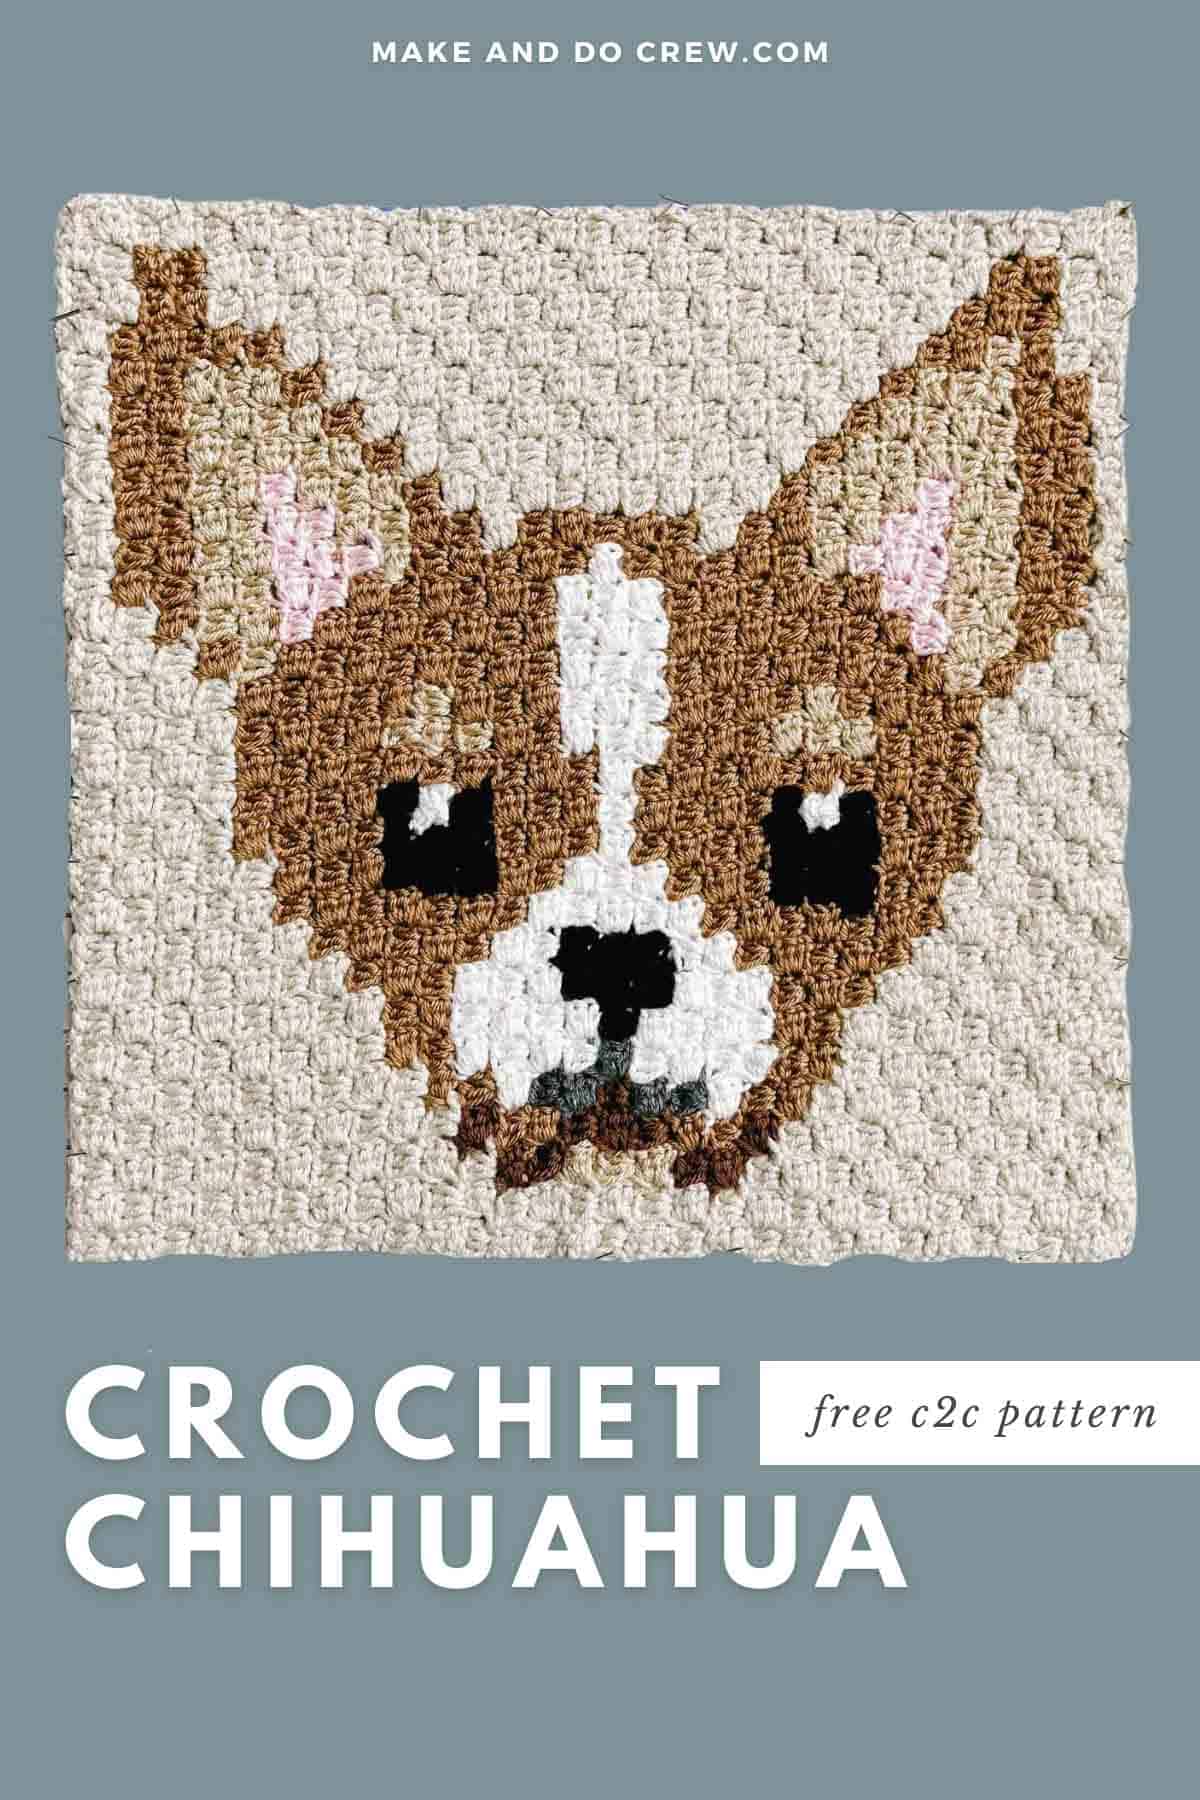 This image shows a free crochet pattern for a corner to corner crochet blanket square featuring a brown and white chihuahua dog on a tan background.